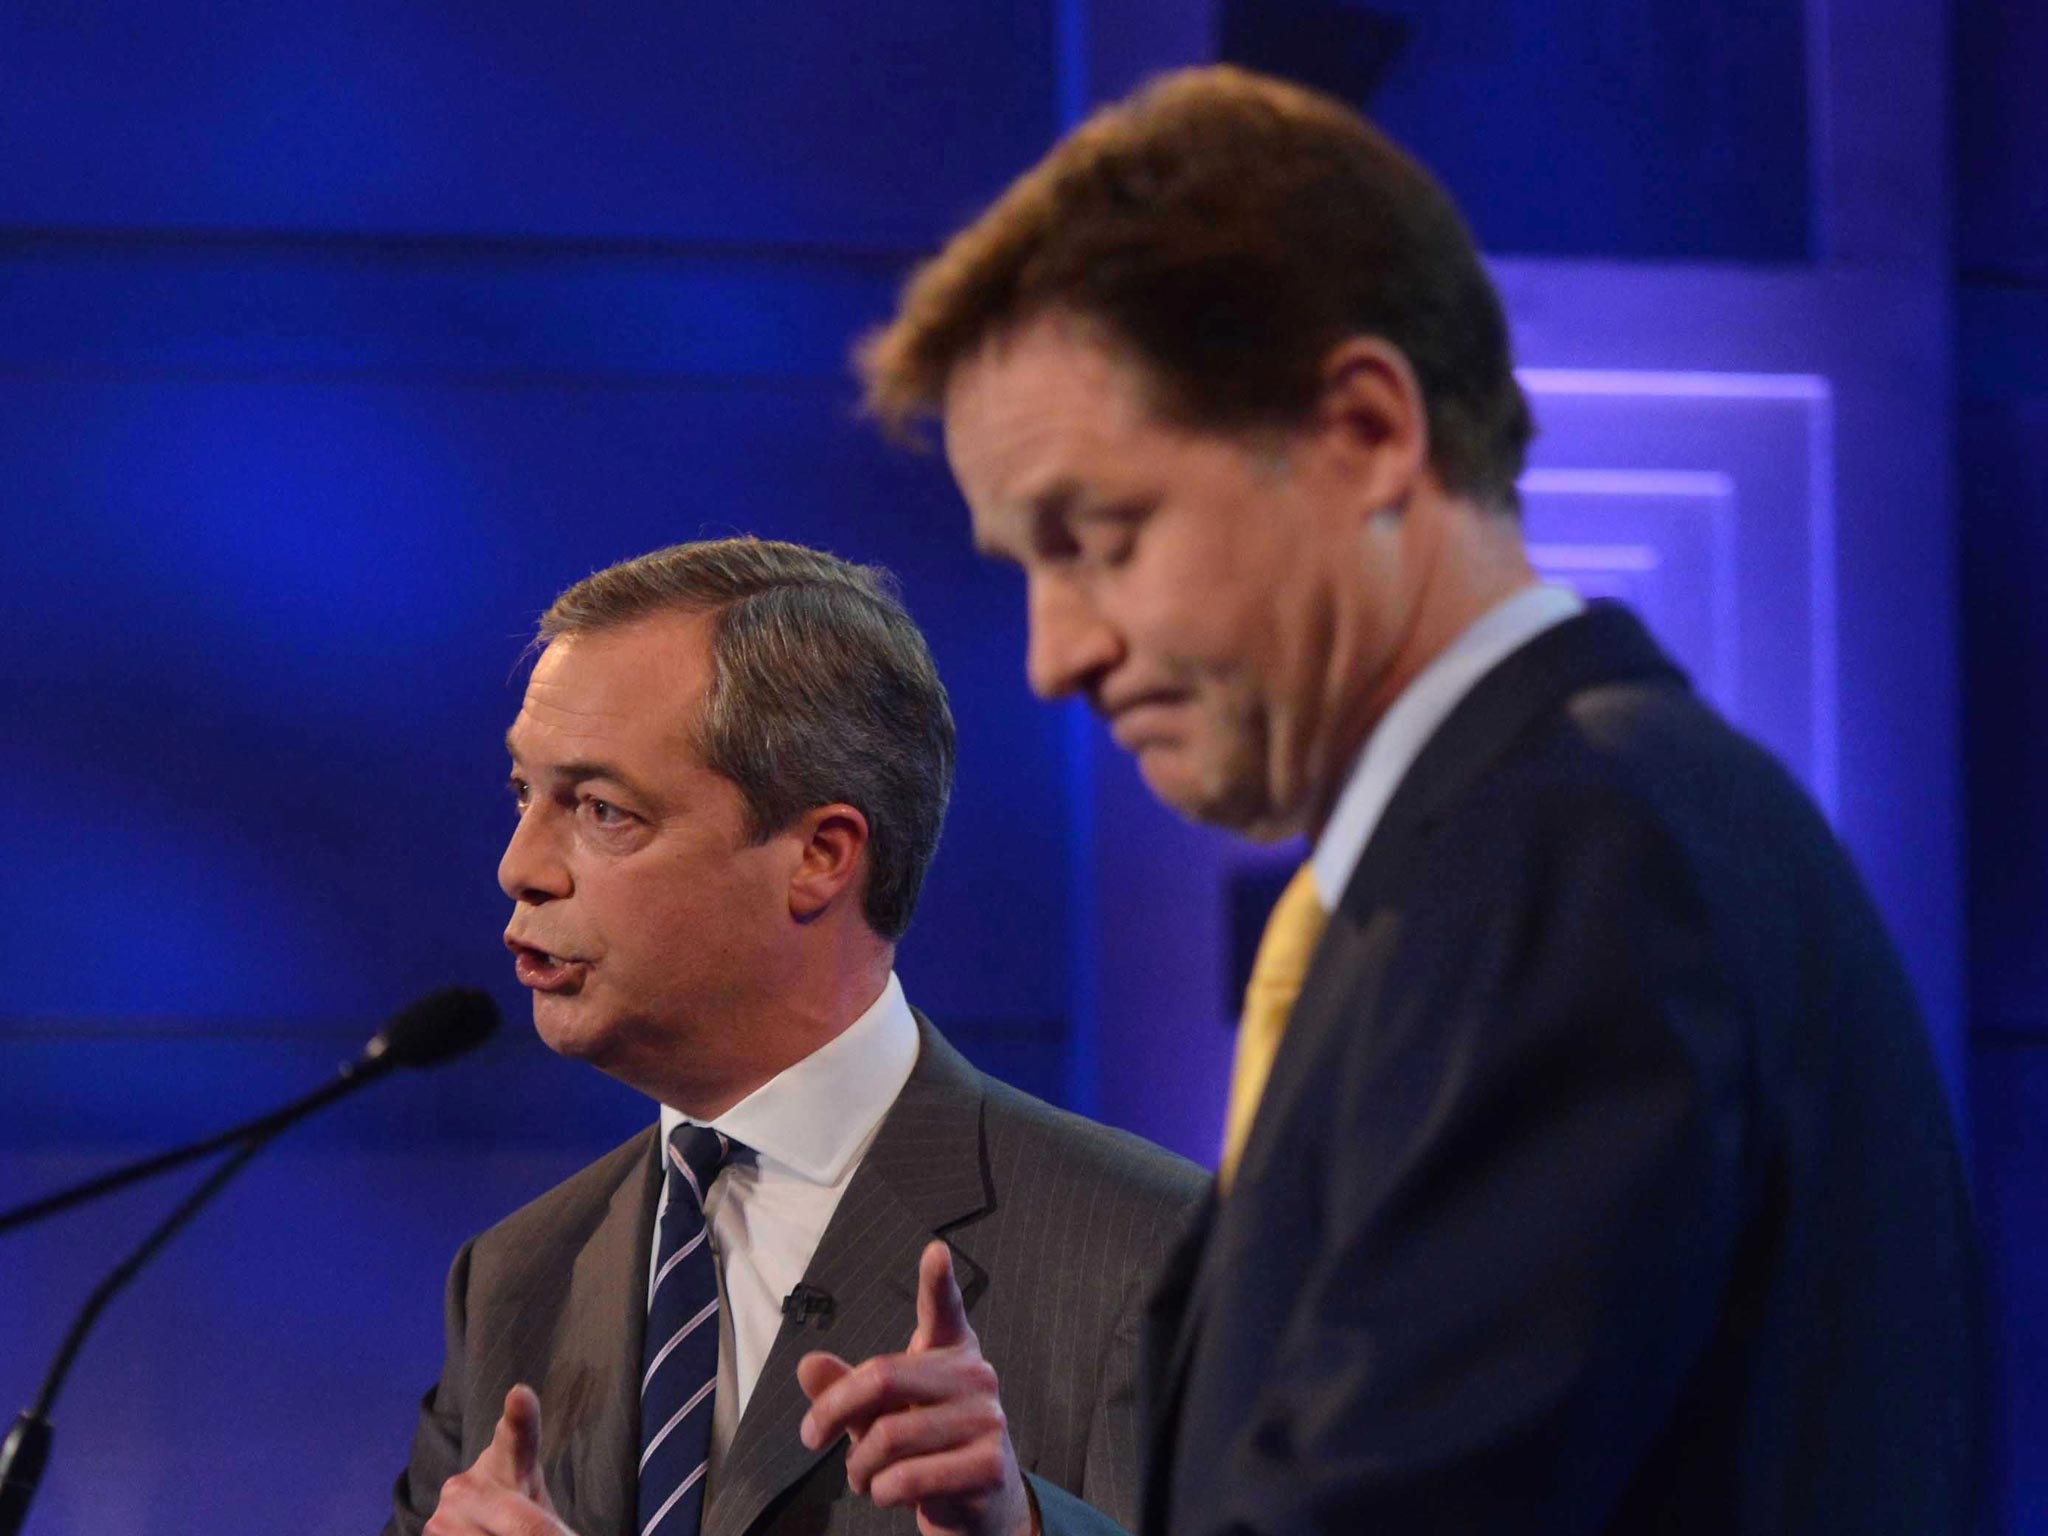 Nick Clegg insisted he had no regrets about challenging Nigel Farage to debate Europe even though he has appeared to 'lose' the contests